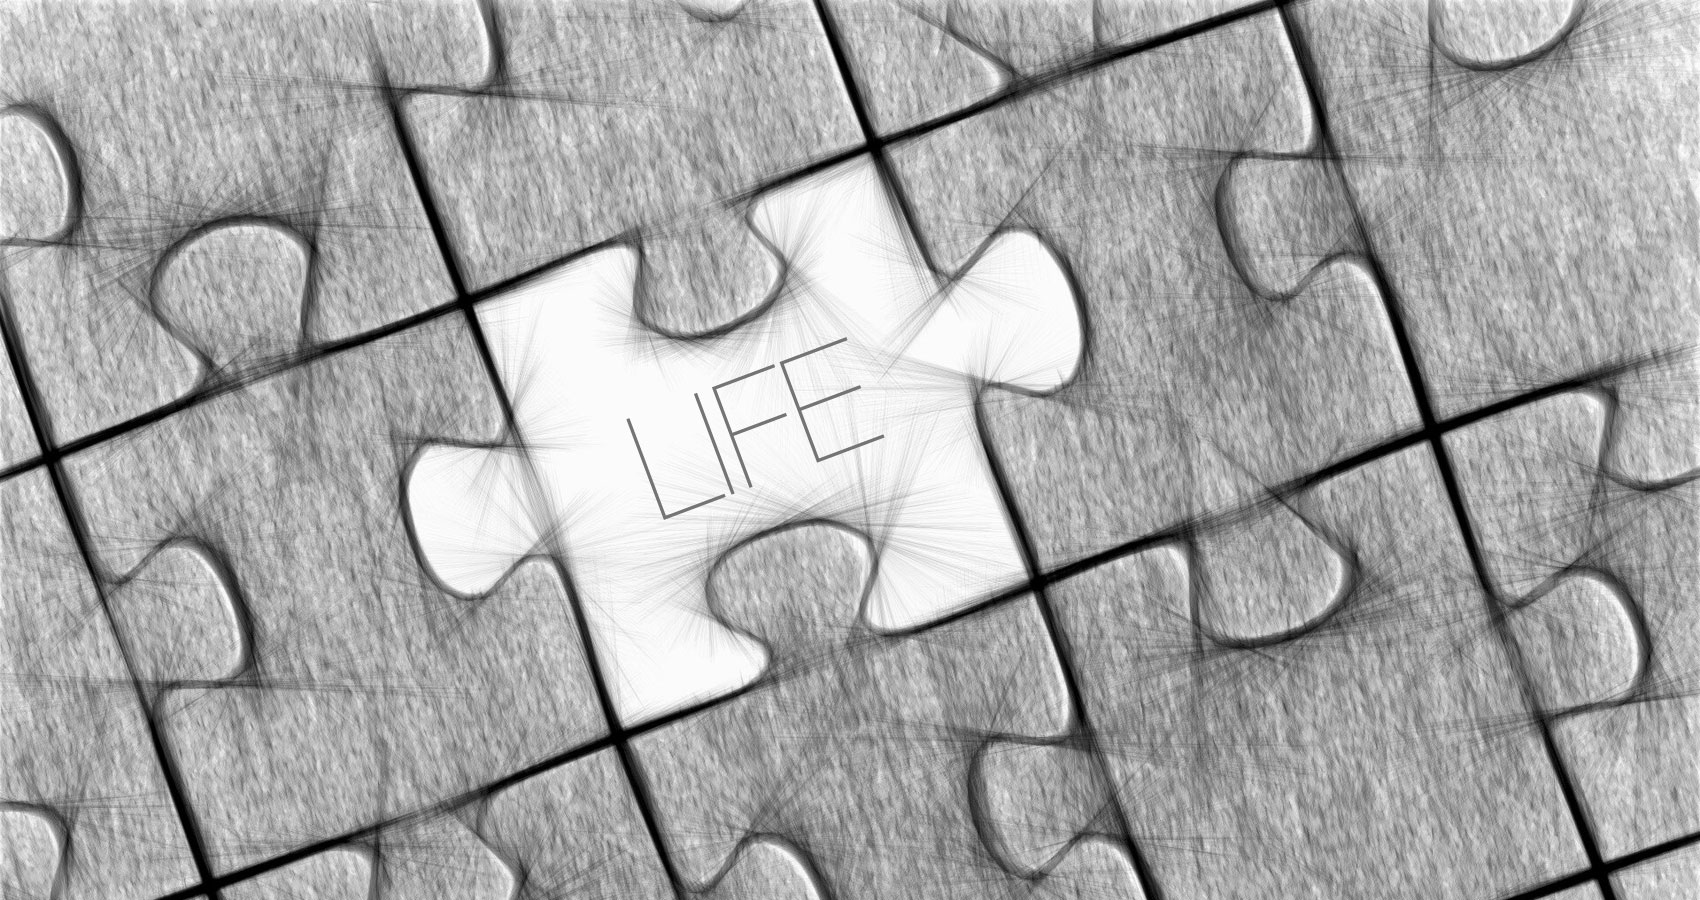 Life Is A Puzzle, poetry written by KL Merchant at Spillwords.com